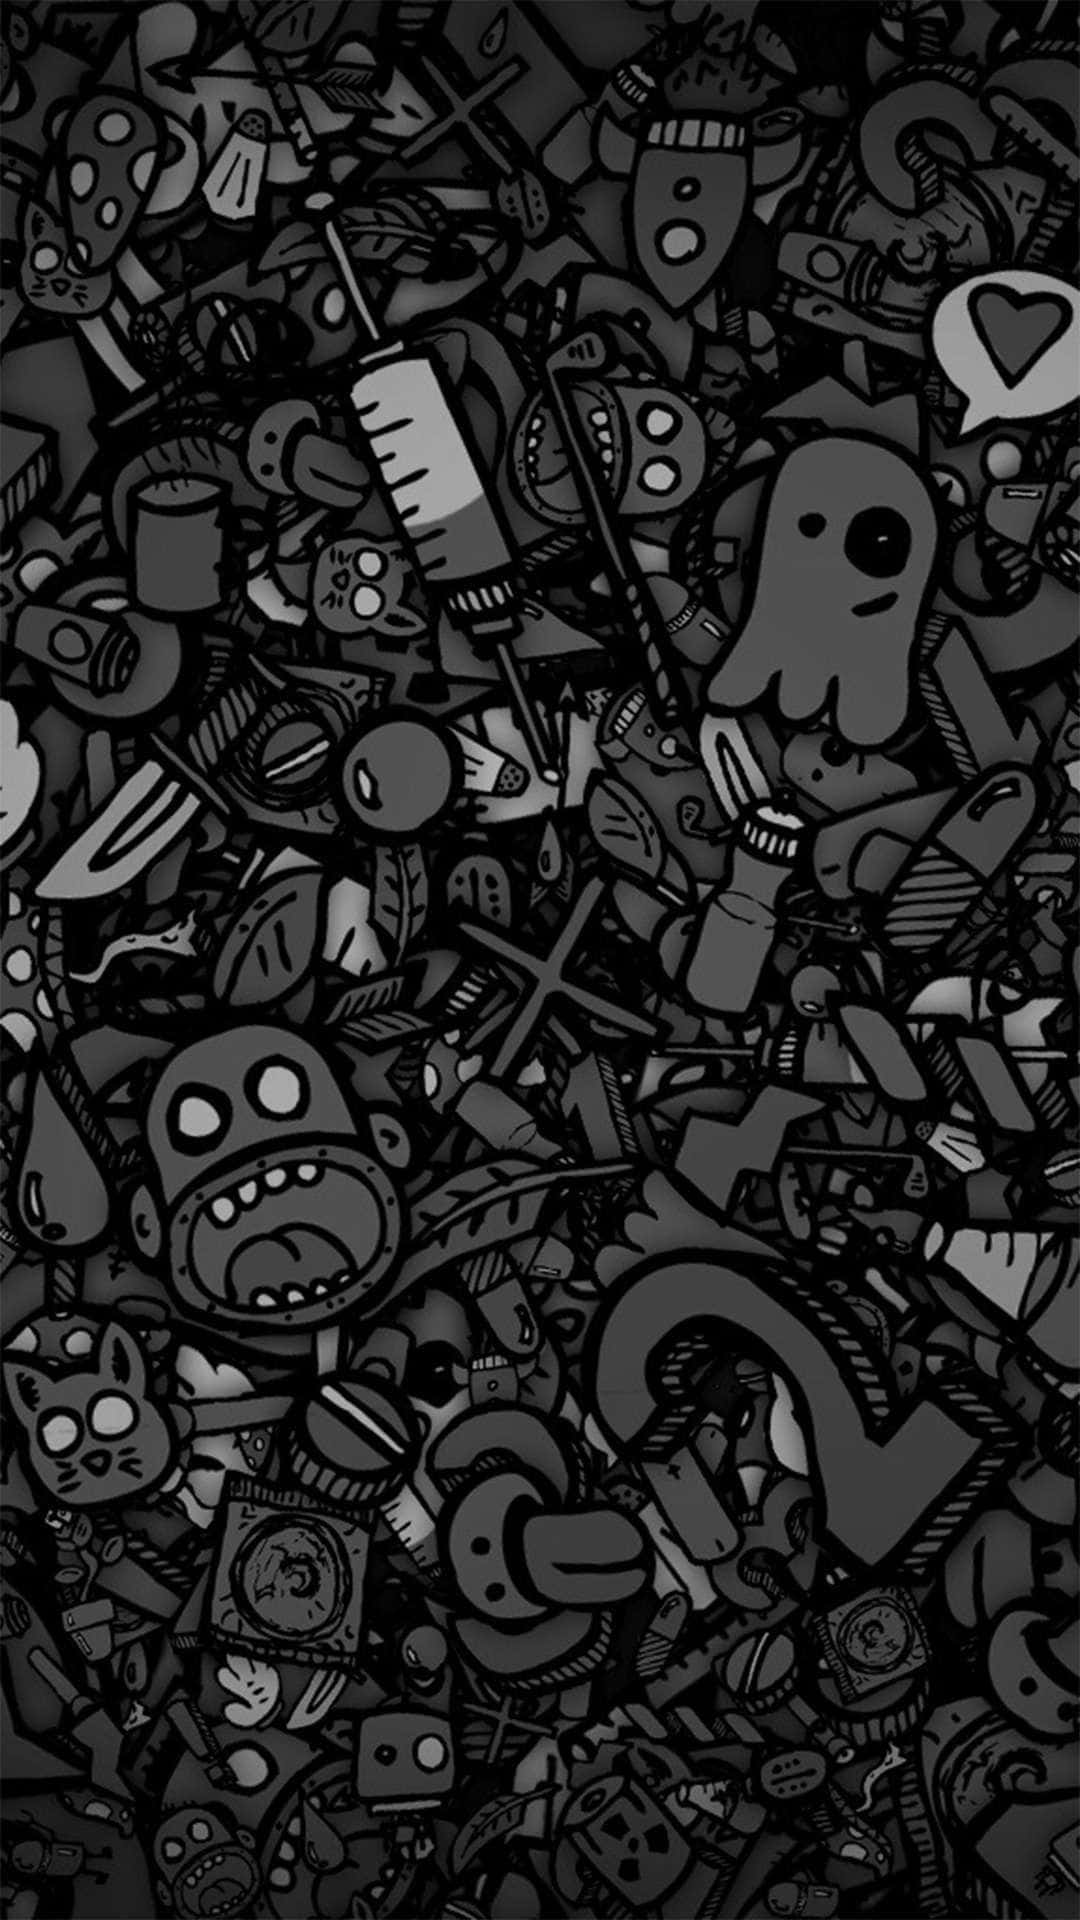 A Black And White Image Of A Black And White Doodle Background